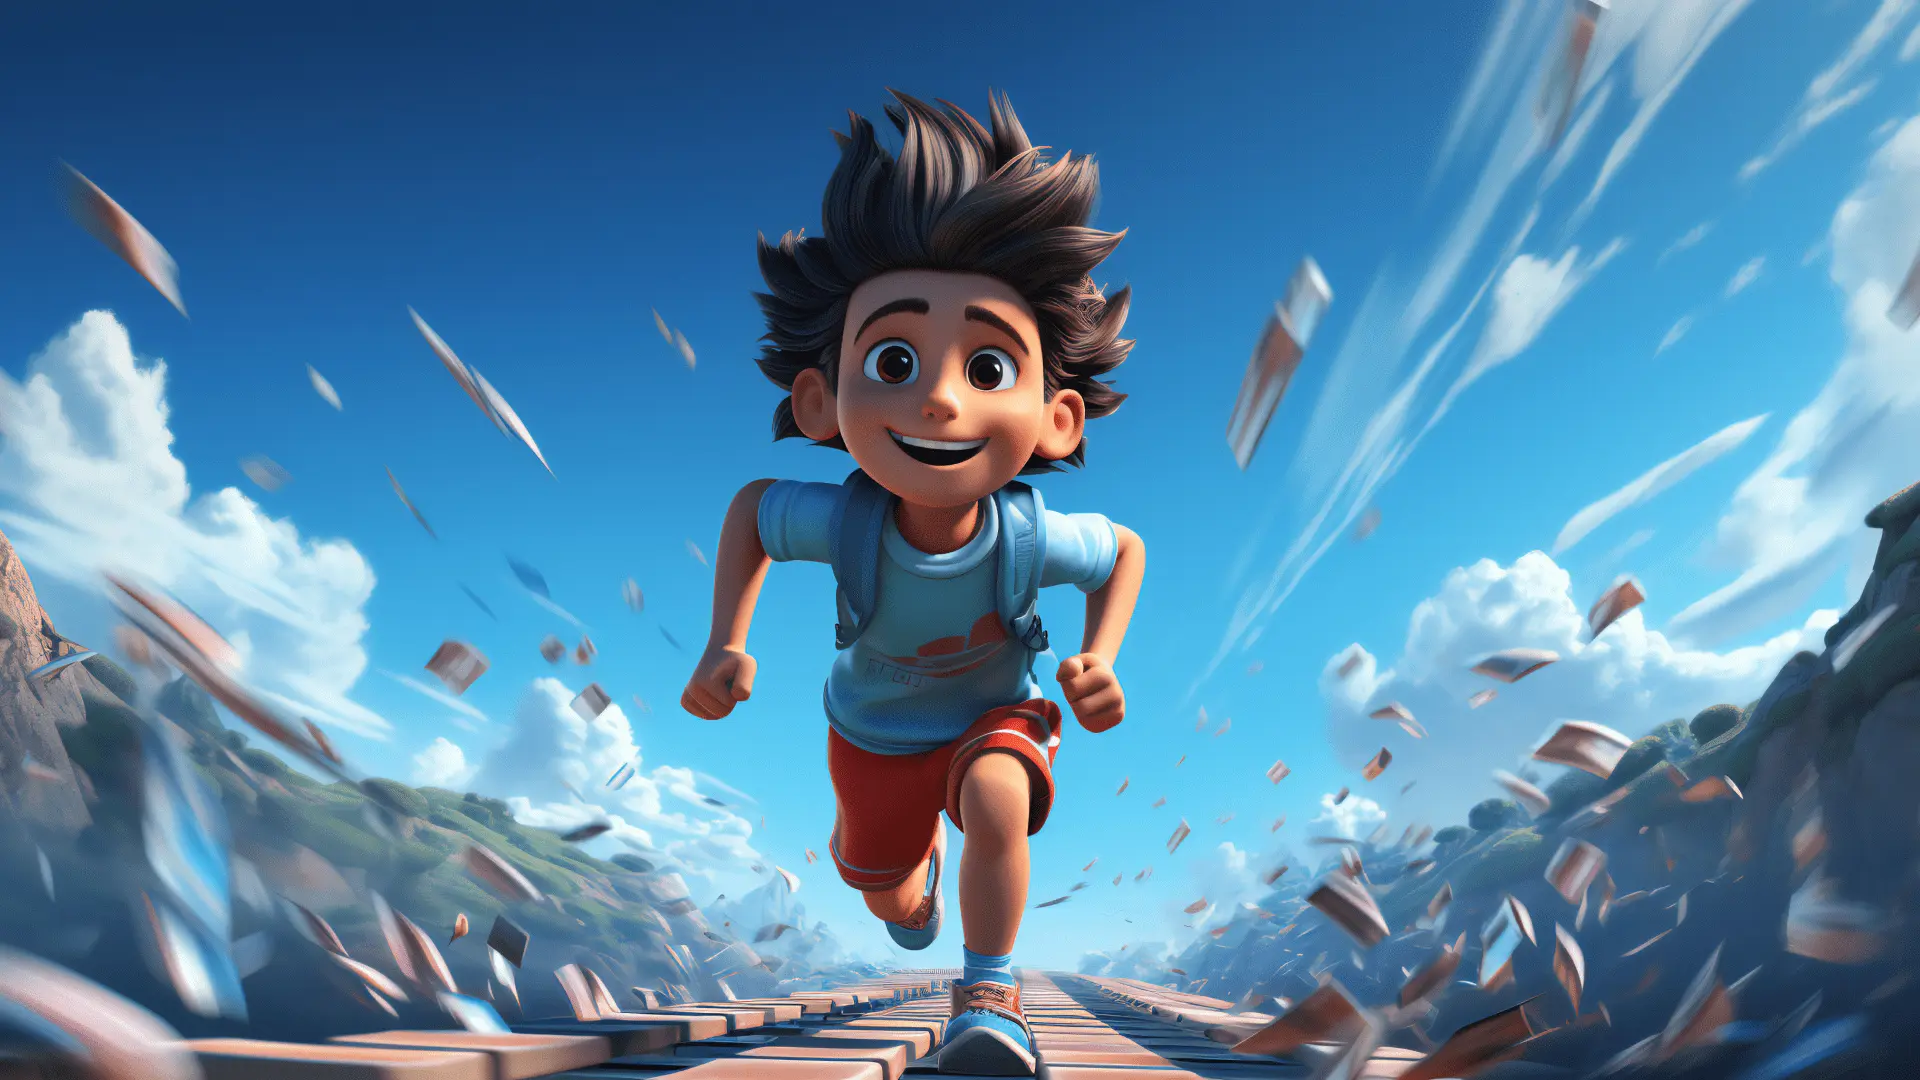 A boy running on a track under a blue sky represents UI UX design.